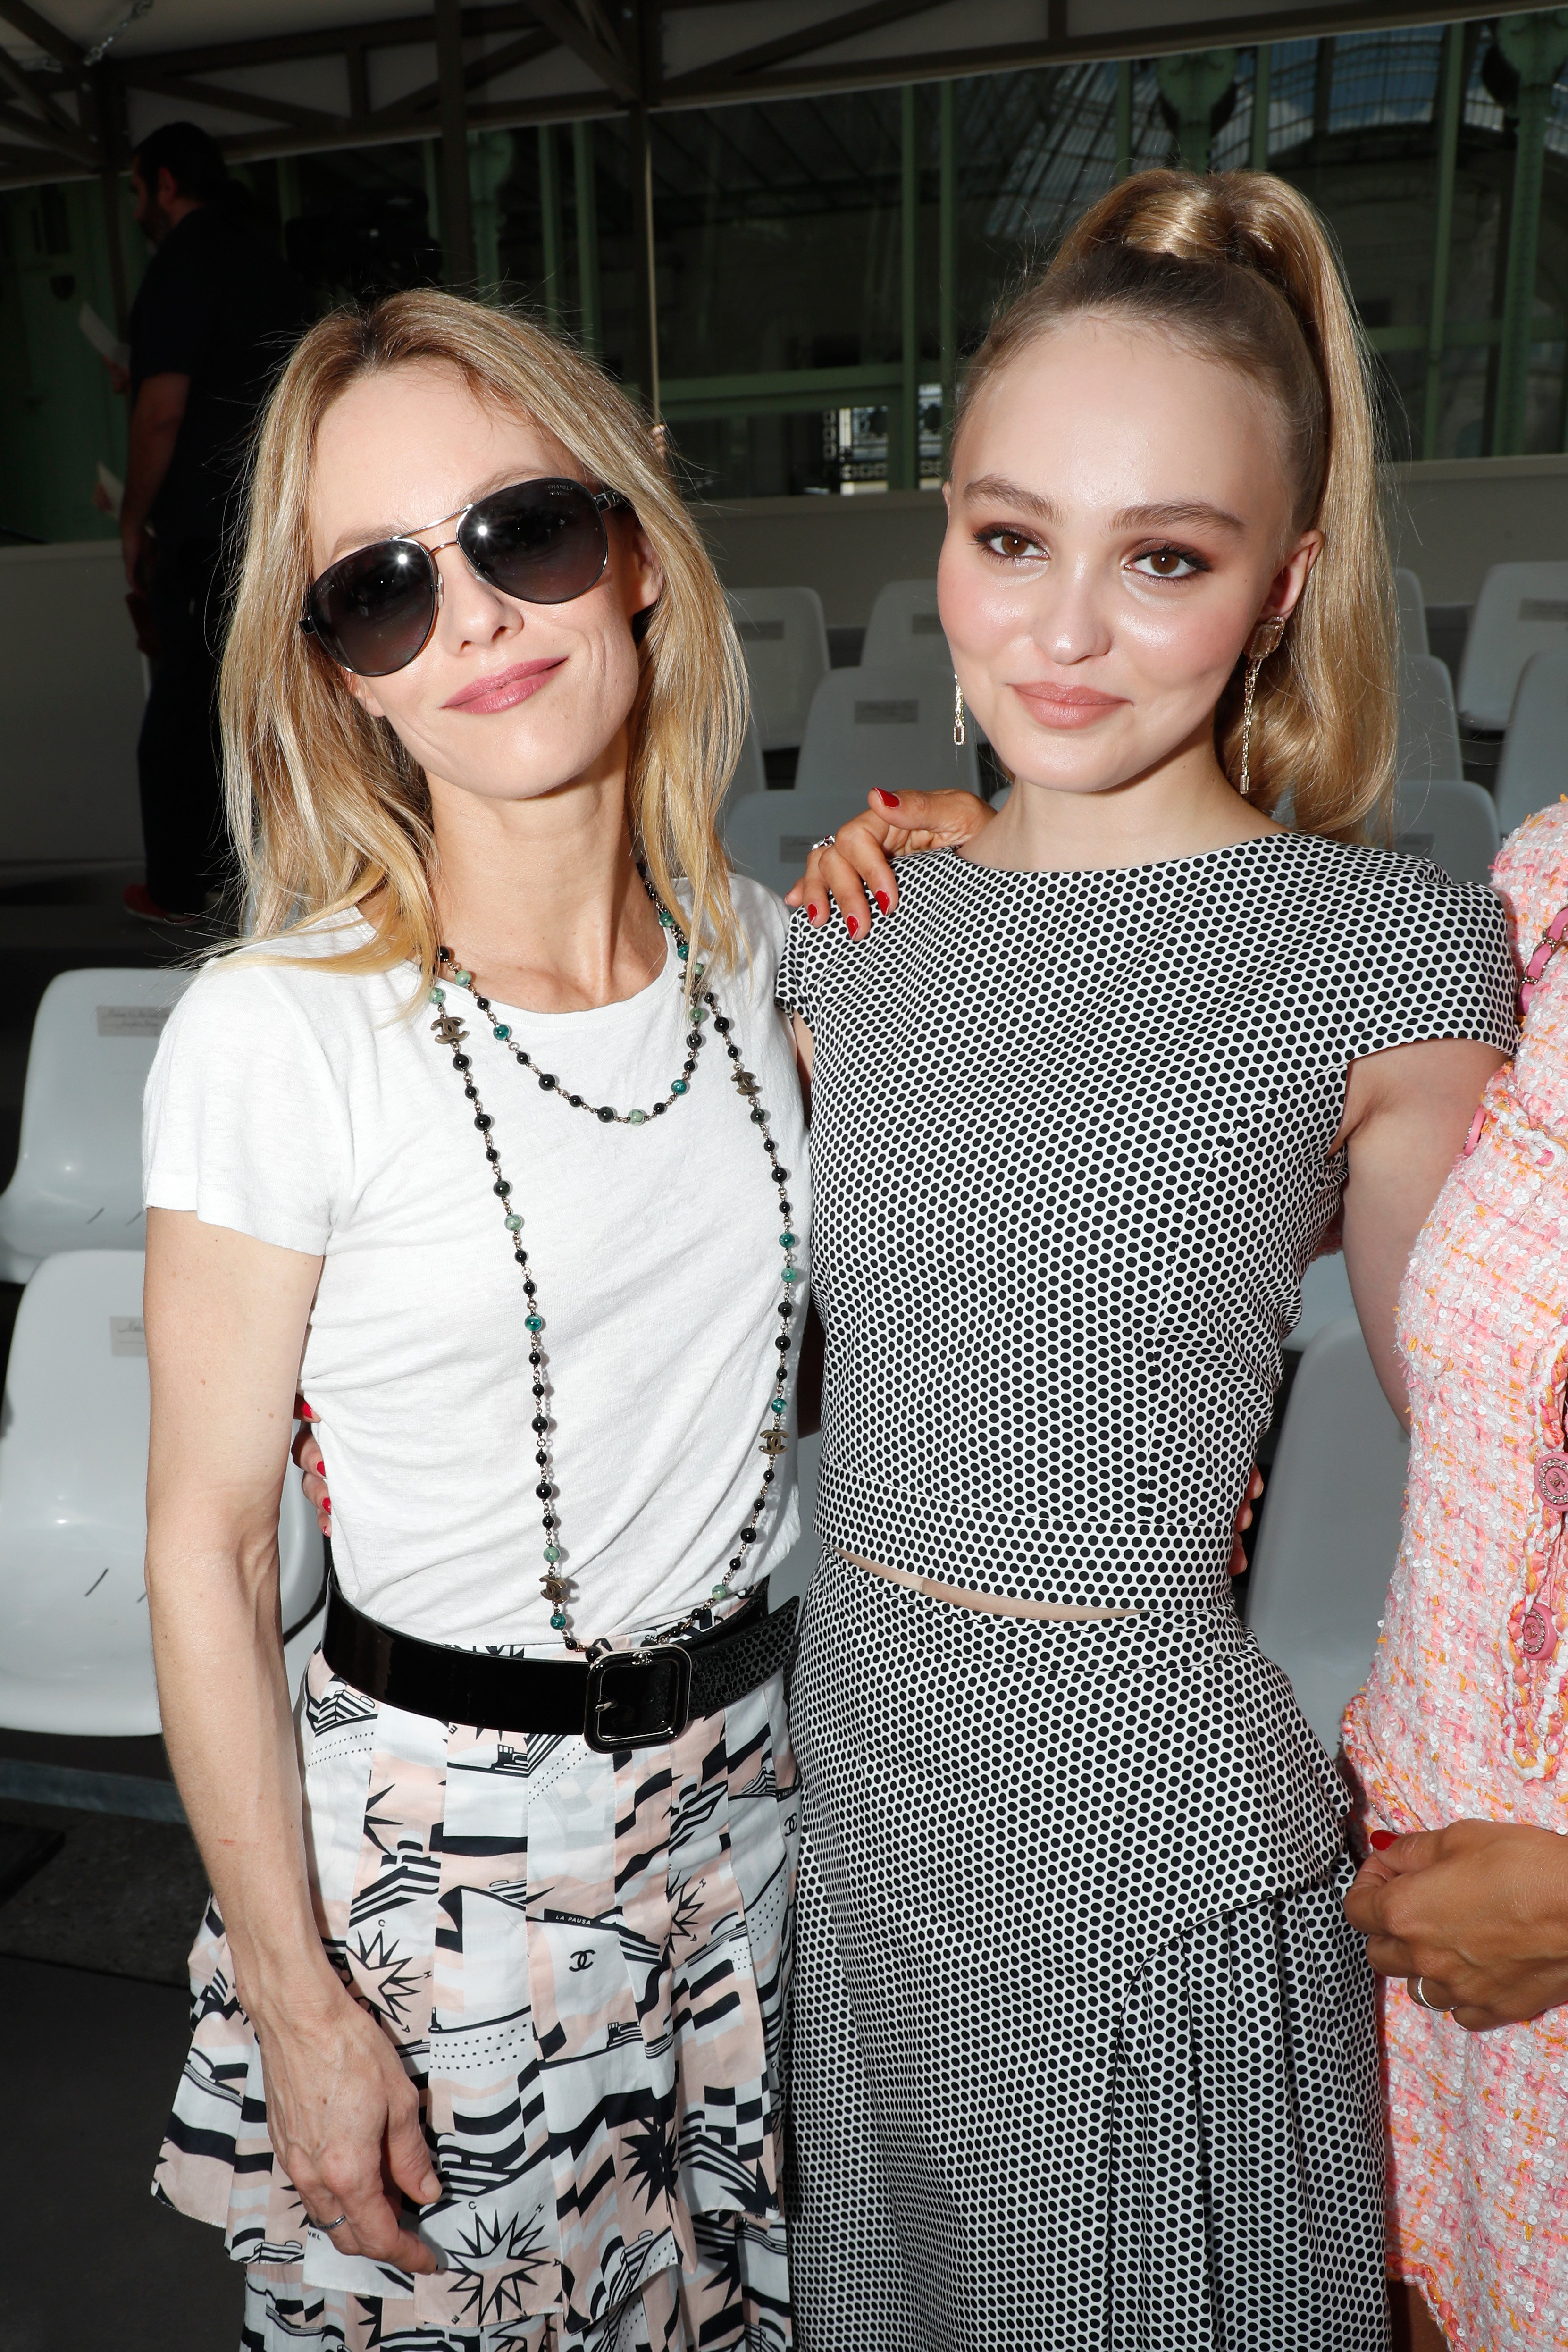 Vanessa Paradis and Lily-Rose Depp at the Chanel Haute Couture Fall Winter 2018/2019 show as part of Paris Fashion Week on July 3, 2018, in Paris, France. | Source: Bertrand Rindoff Petroff/Getty Images